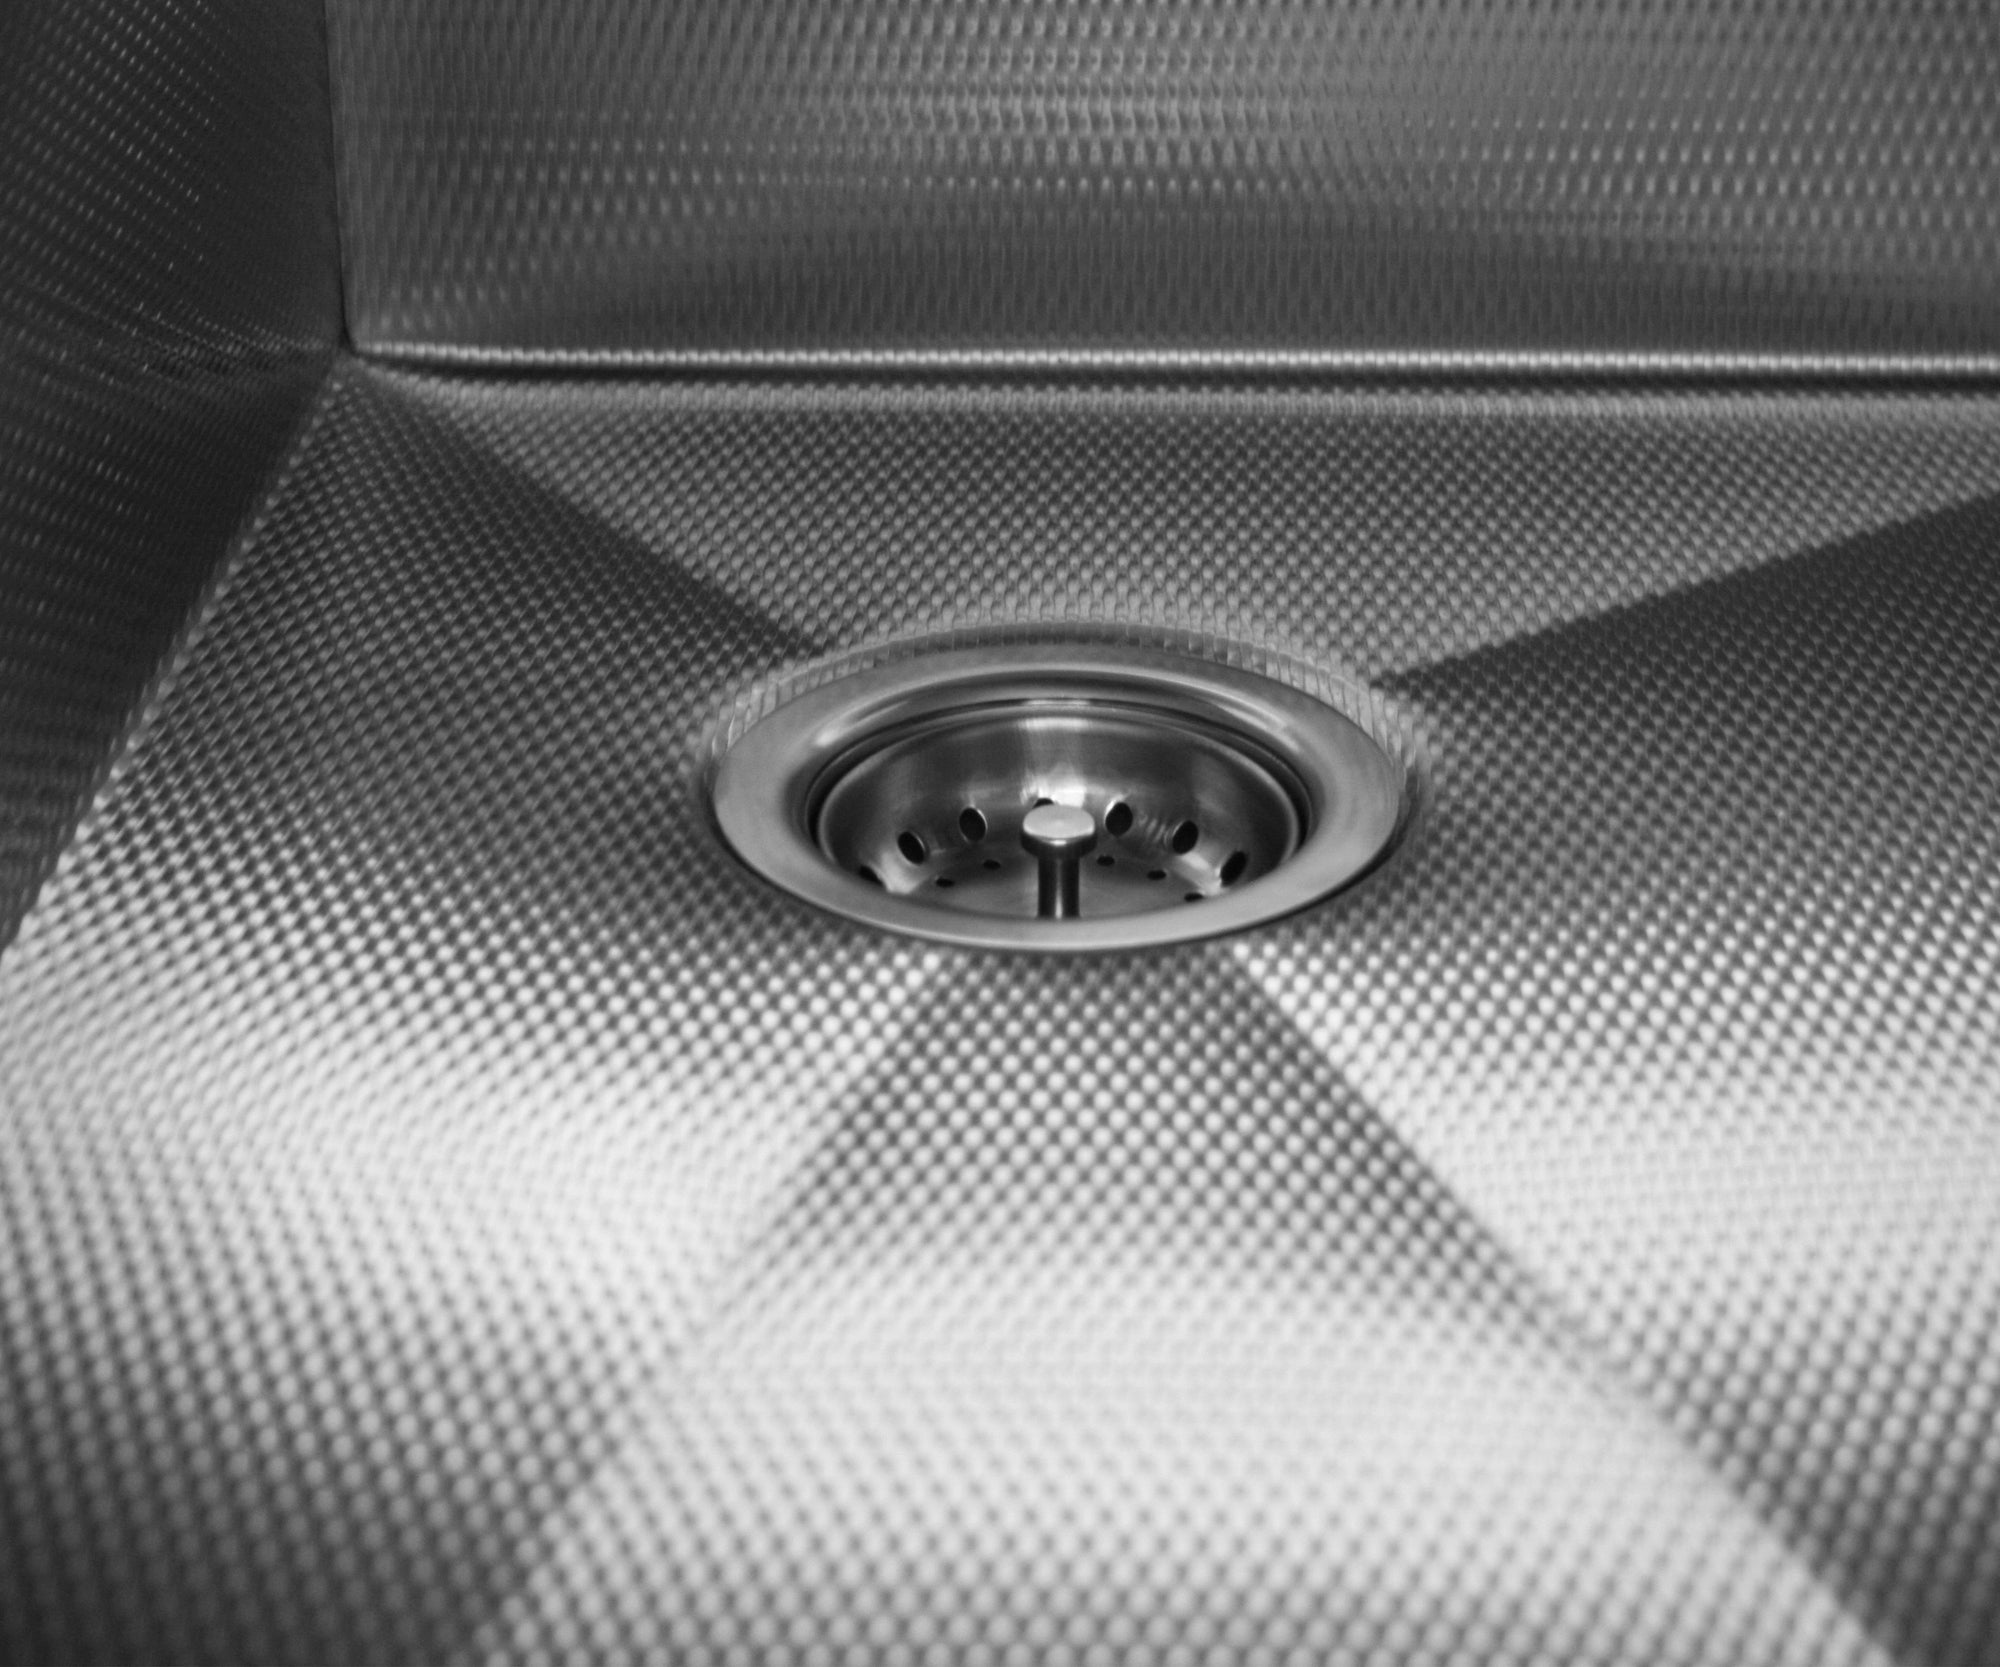 Heritage stainless under mount sink.